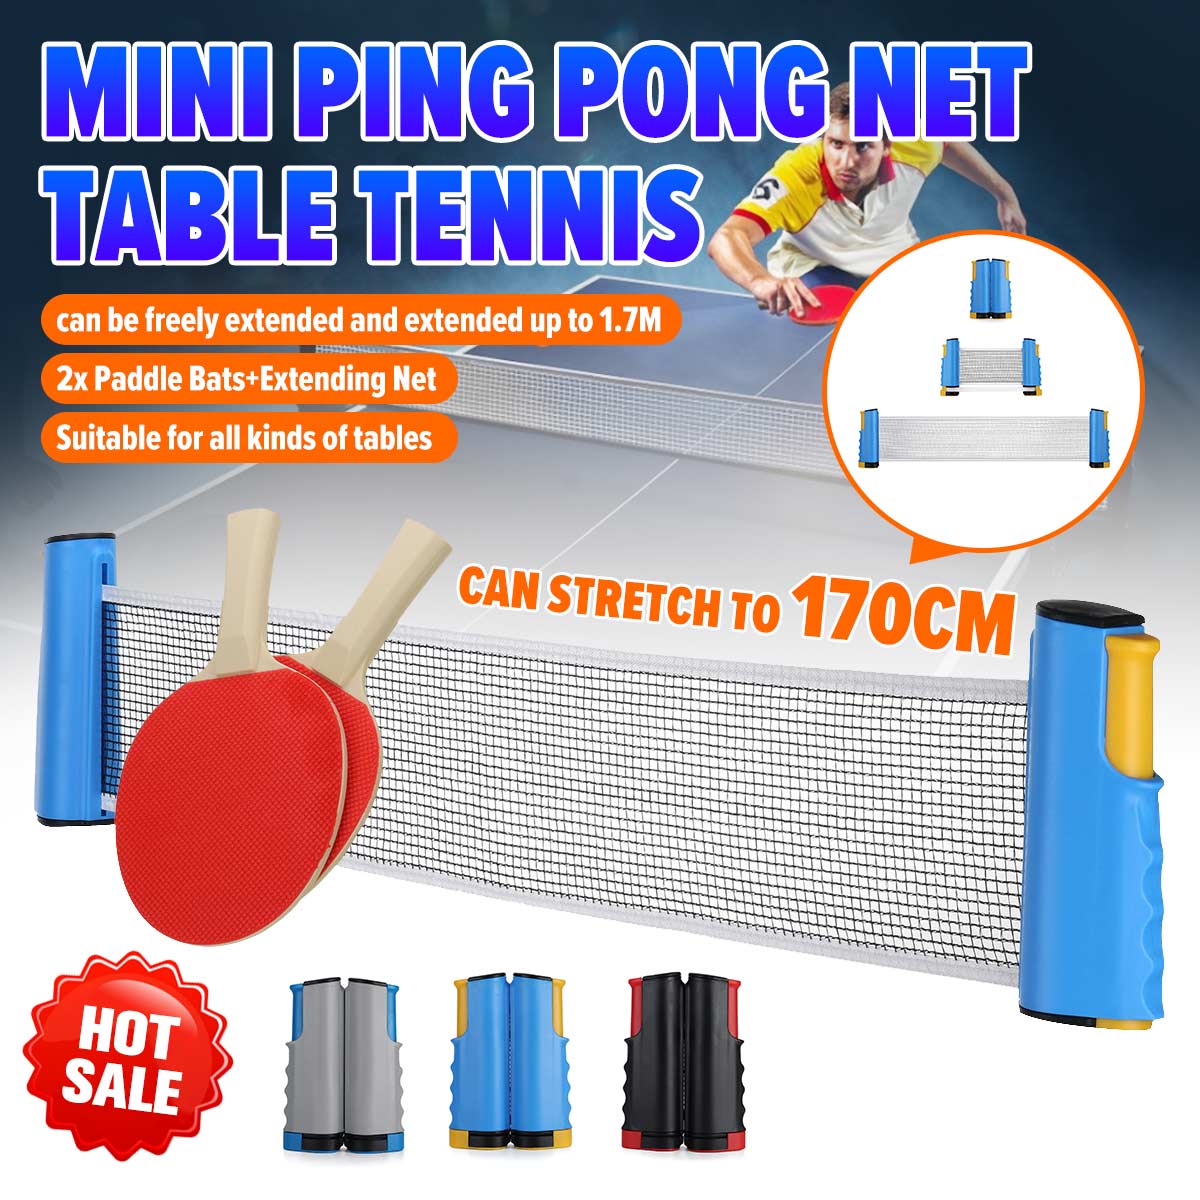 17M-Retractable-Ping-Pong-Net-Set-For-Any-Table-2-Table-Tennis-Paddles-Home-Indoor-Training-Outdoor--1780336-1